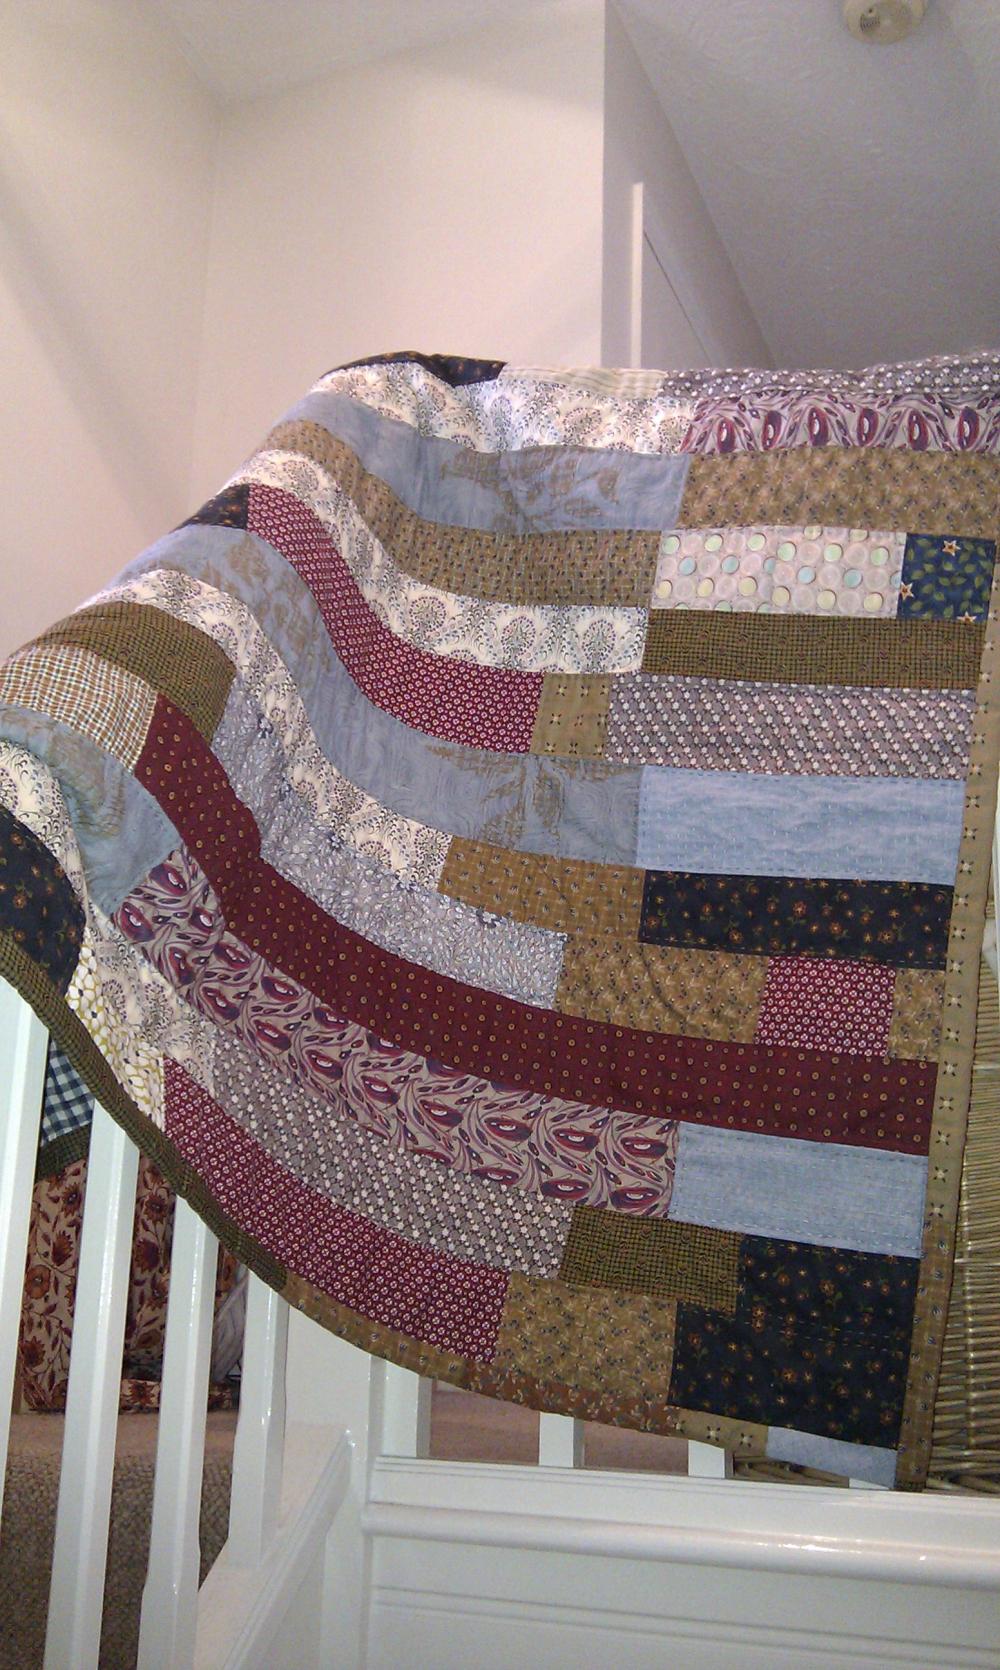 Modern Patchwork Handmade Quilt In Stripes Of Blue Burgundy And Brown Boys Quilt Lap Quilt